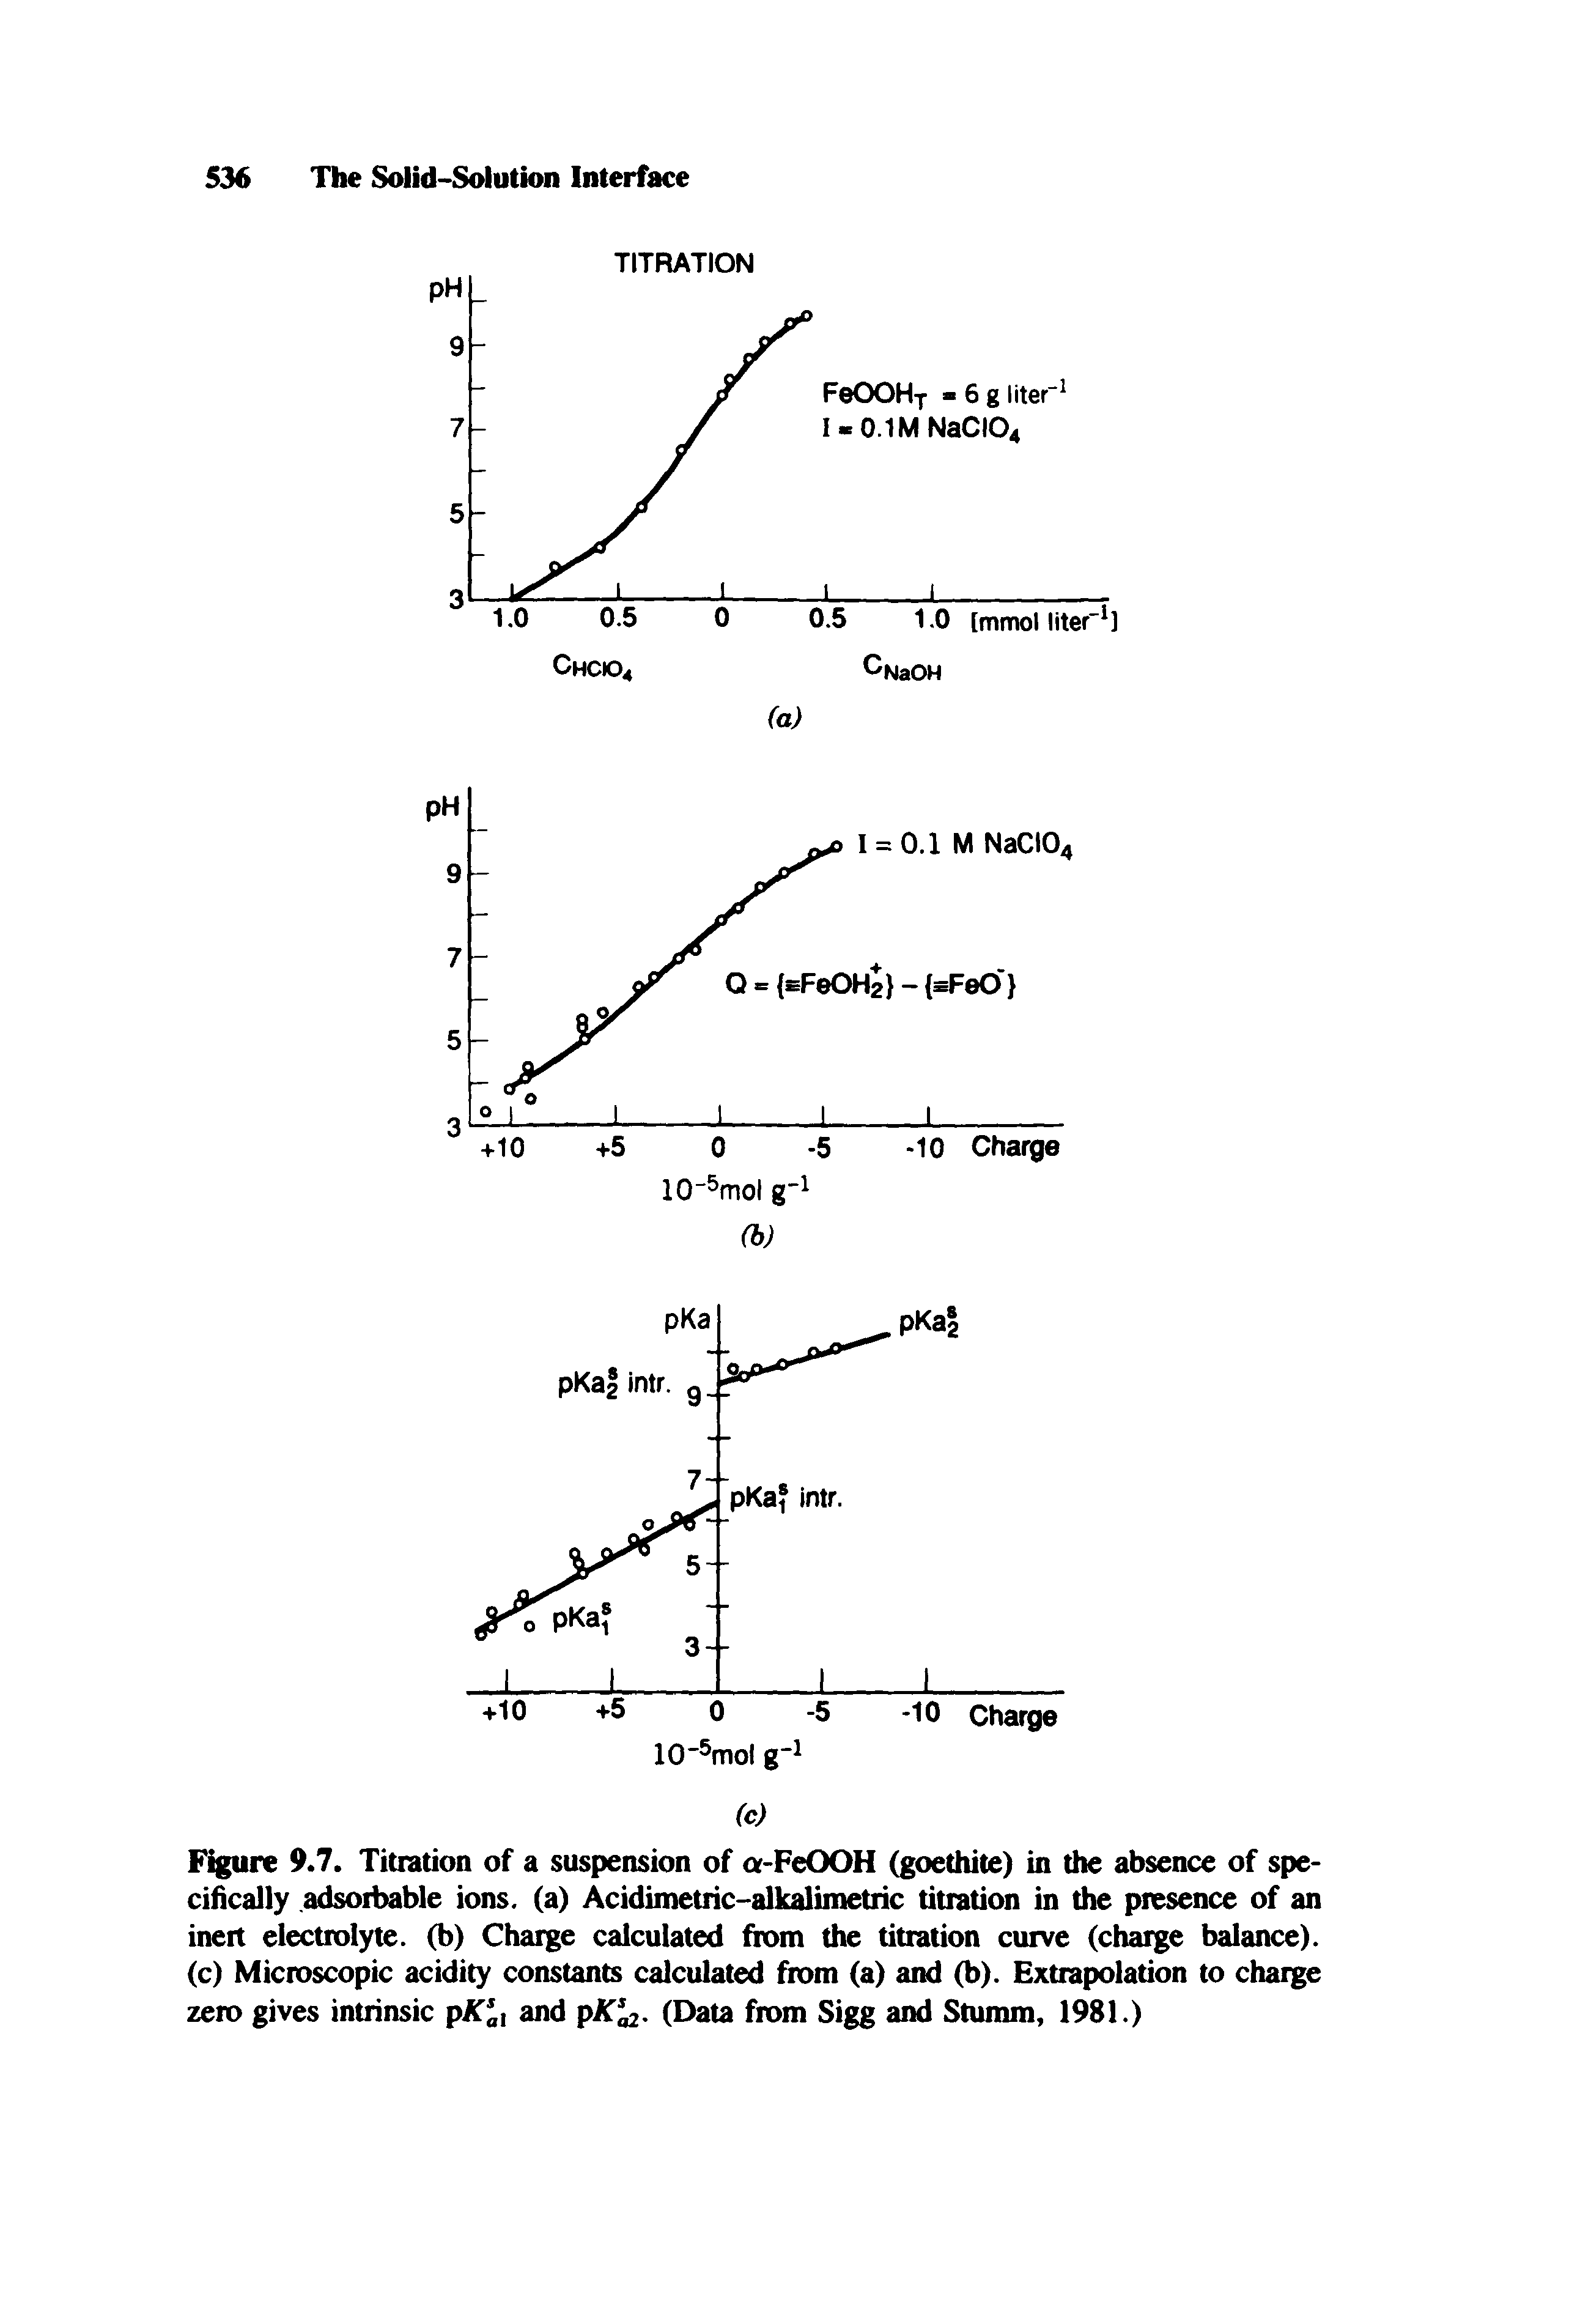 Figure 9.7. Titration of a suspension of a-FeOOH (goethite) in the absence of specifically adsoibable ions, (a) Acidimetric-alkalimetric titration in the presence of an inert electrolyte, (b) Charge calculated fix>m the titration curve (cluuge balance), (c) Microscopic acidity constants calculated from (a) and (b). Extrapolation to charge zero gives intrinsic and pA. (Data from Sigg and Stumm, 1981.)...